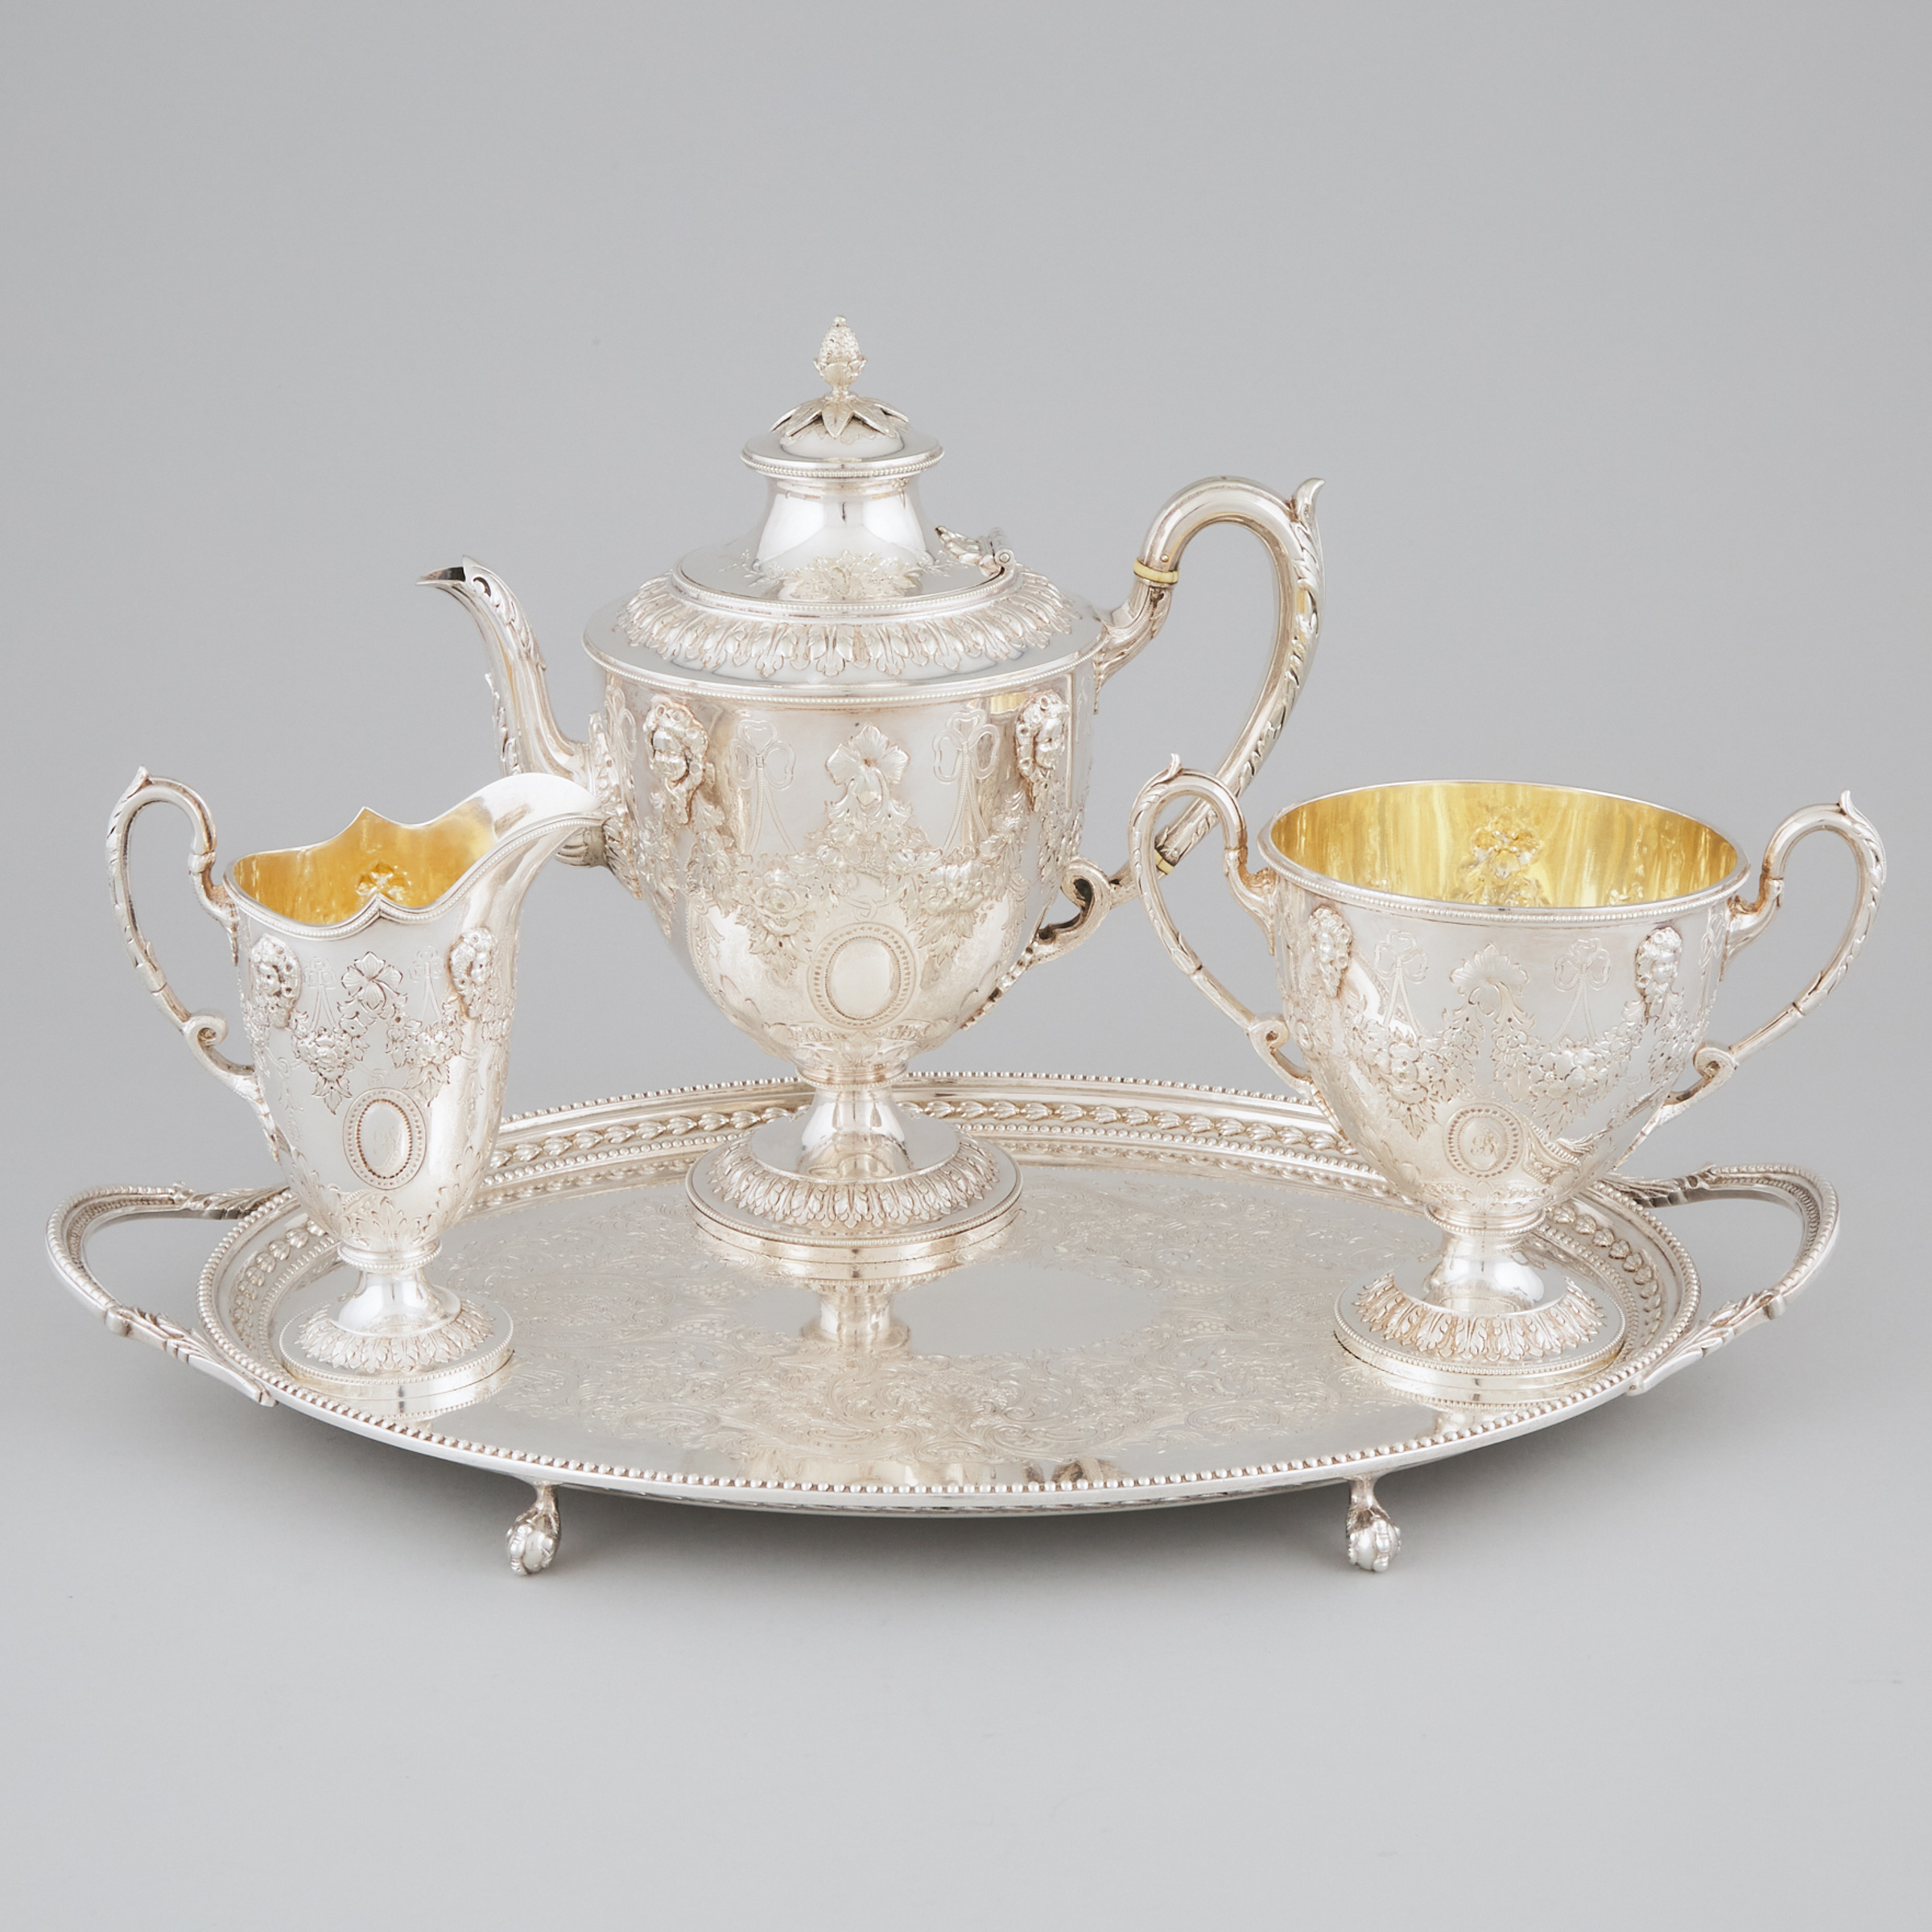 English Silver Plated Tea Service with a Two-Handled Oval Serving Tray, 20th century